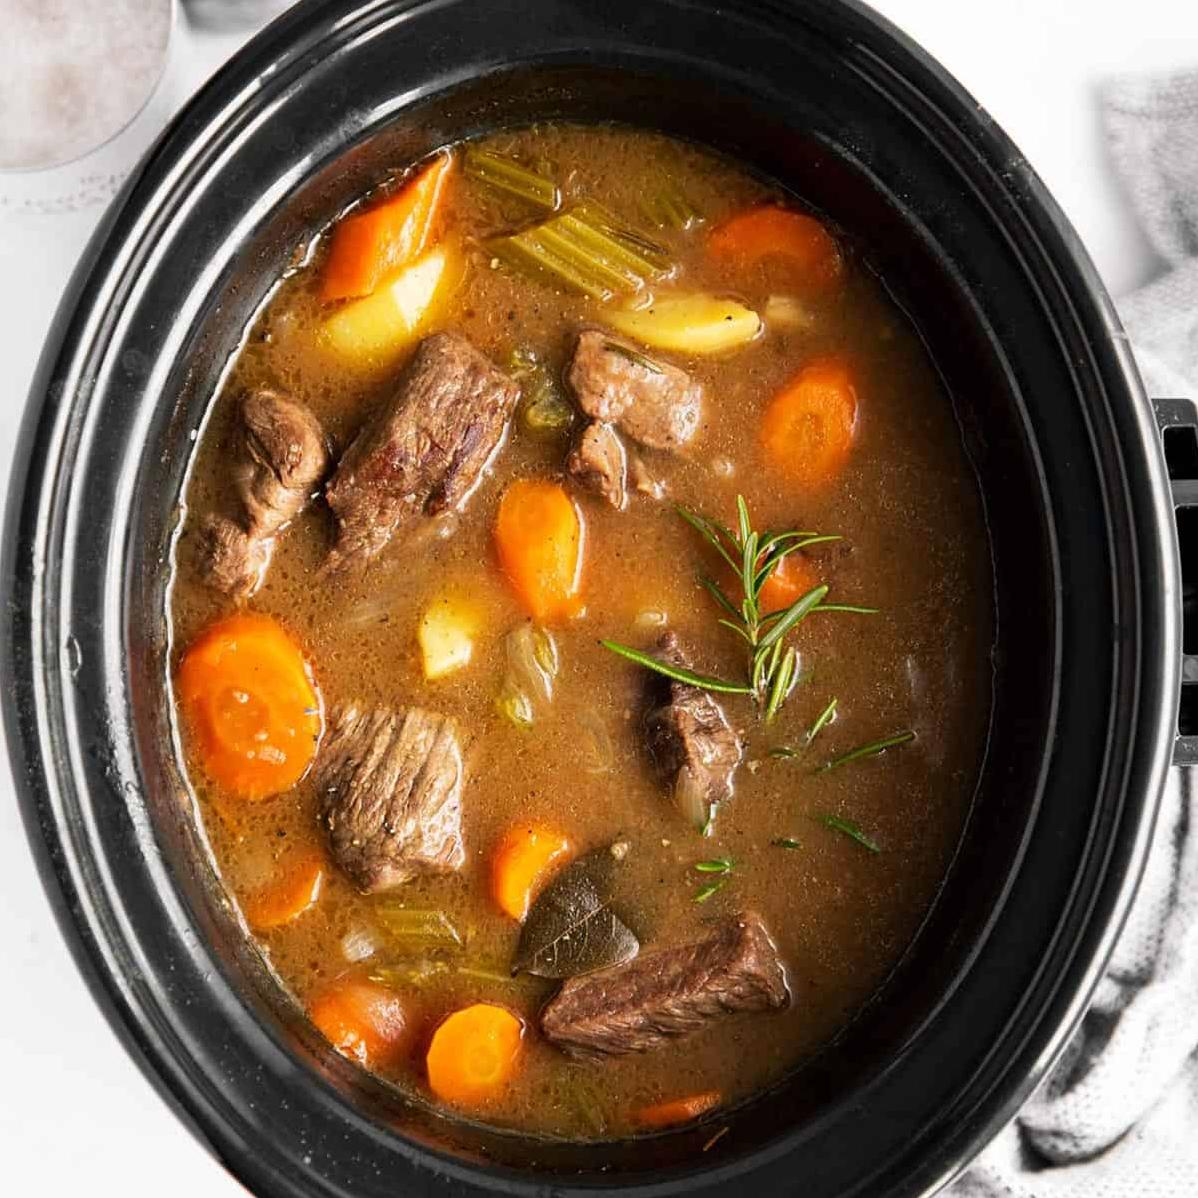  Tender chunks of meat mingle with earthy vegetables in this soul-warming stew.